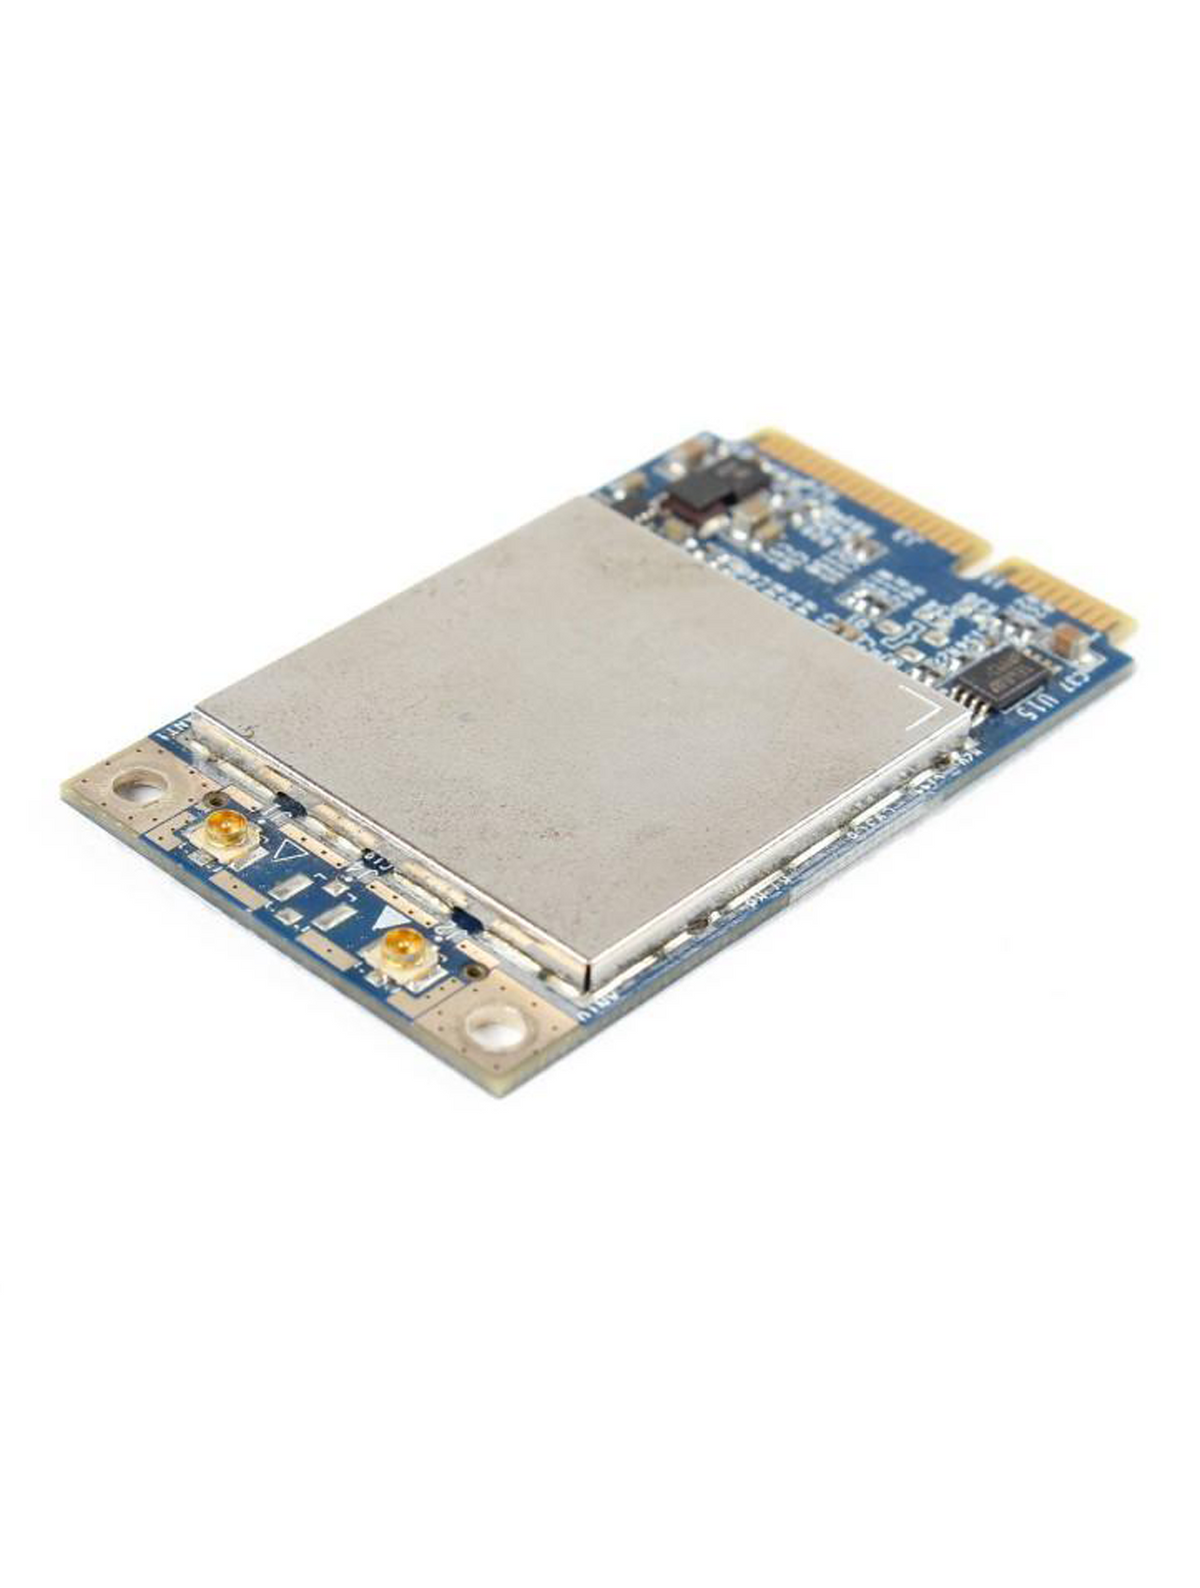 AIRPORT EXTREME CARD COMPATIBLE FOR MACBOOK 13" A1181 (EARLY 2009 - MID 2009)